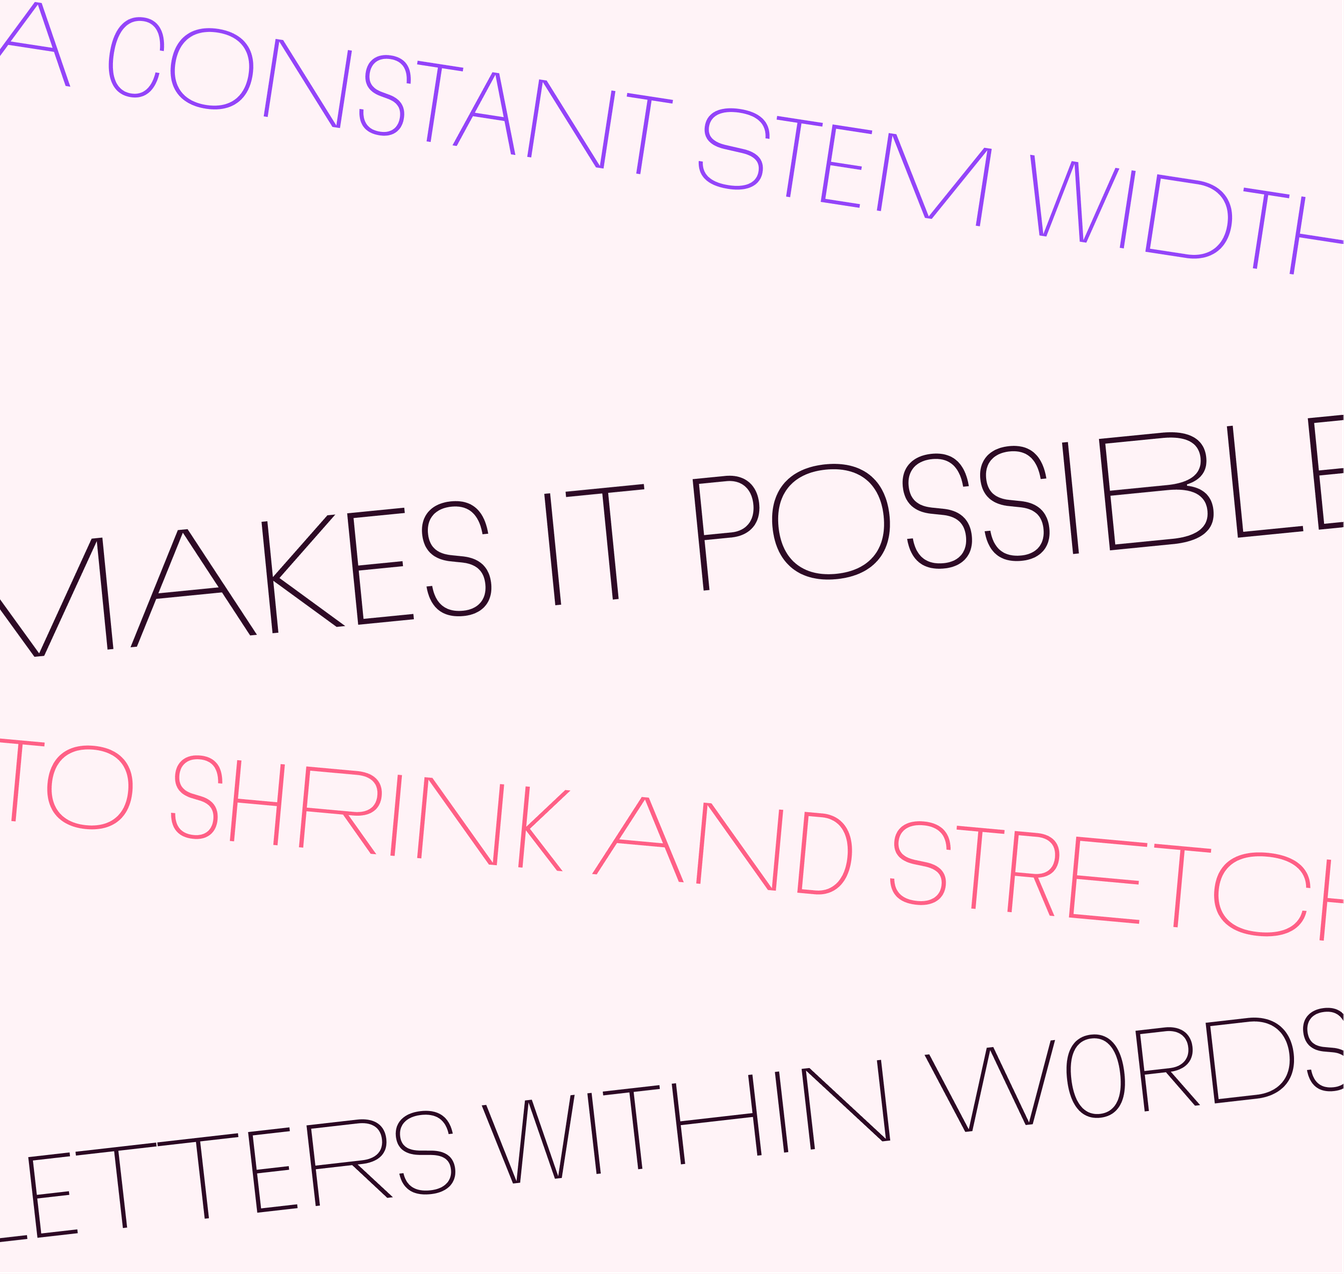 Martian Grotesk can shrink and stretch